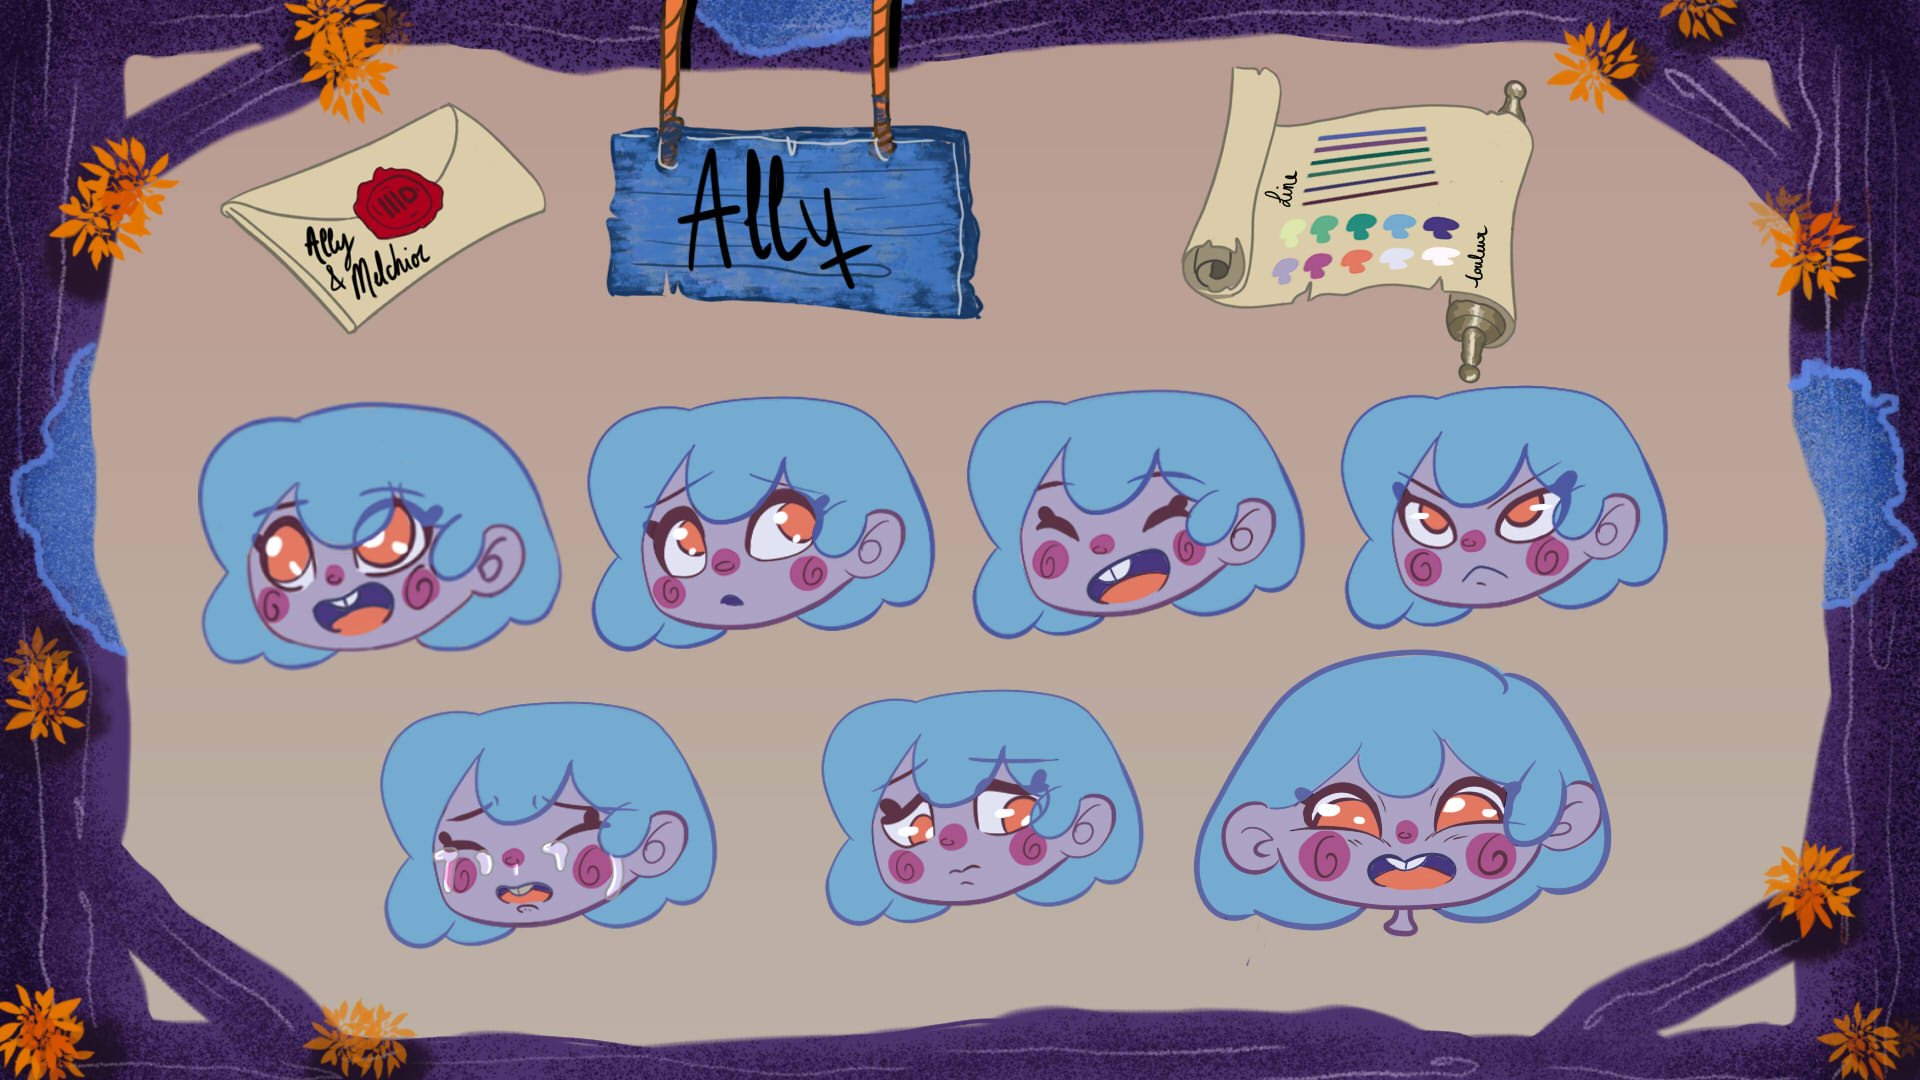 Ally expression sheet